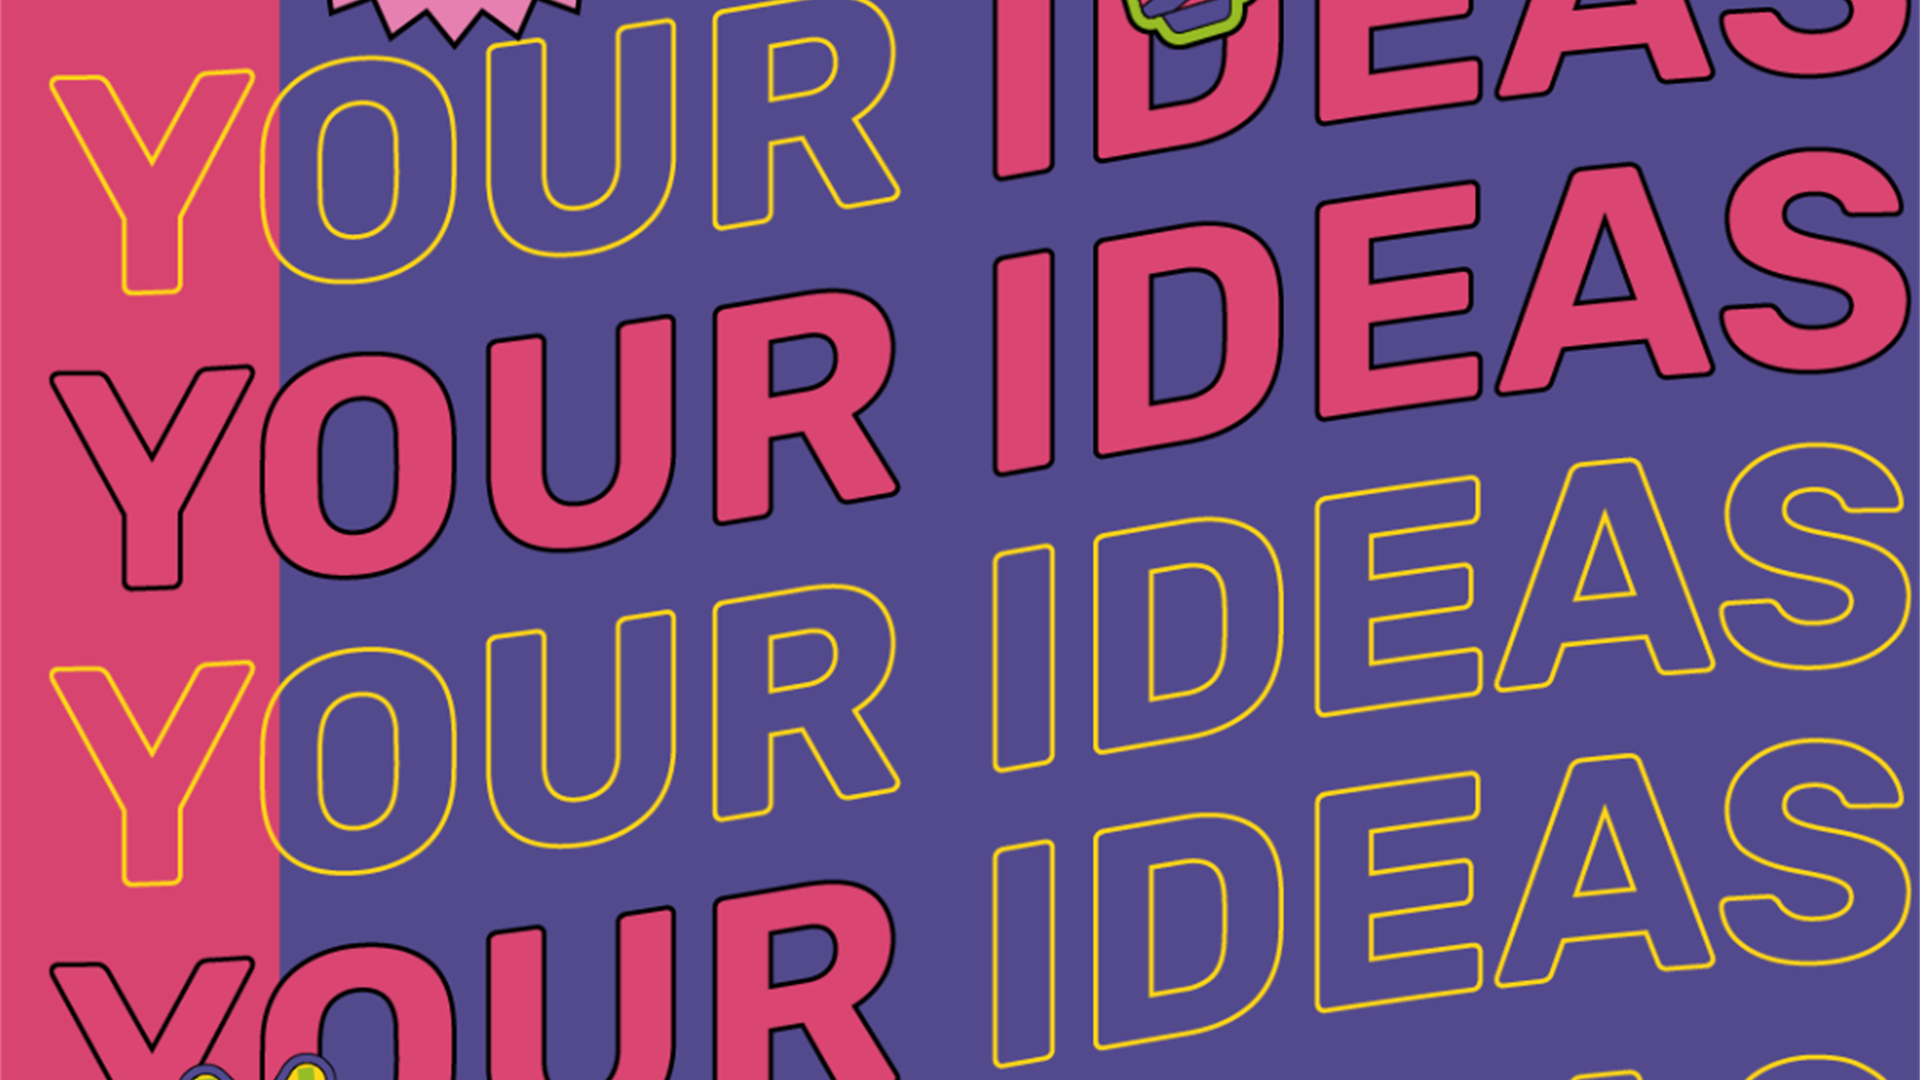 If you bring the ideas, we can bring the tools to make it happen! The new Ideas platform is a digital decision making platform for campaign ideas and union policy proposals.